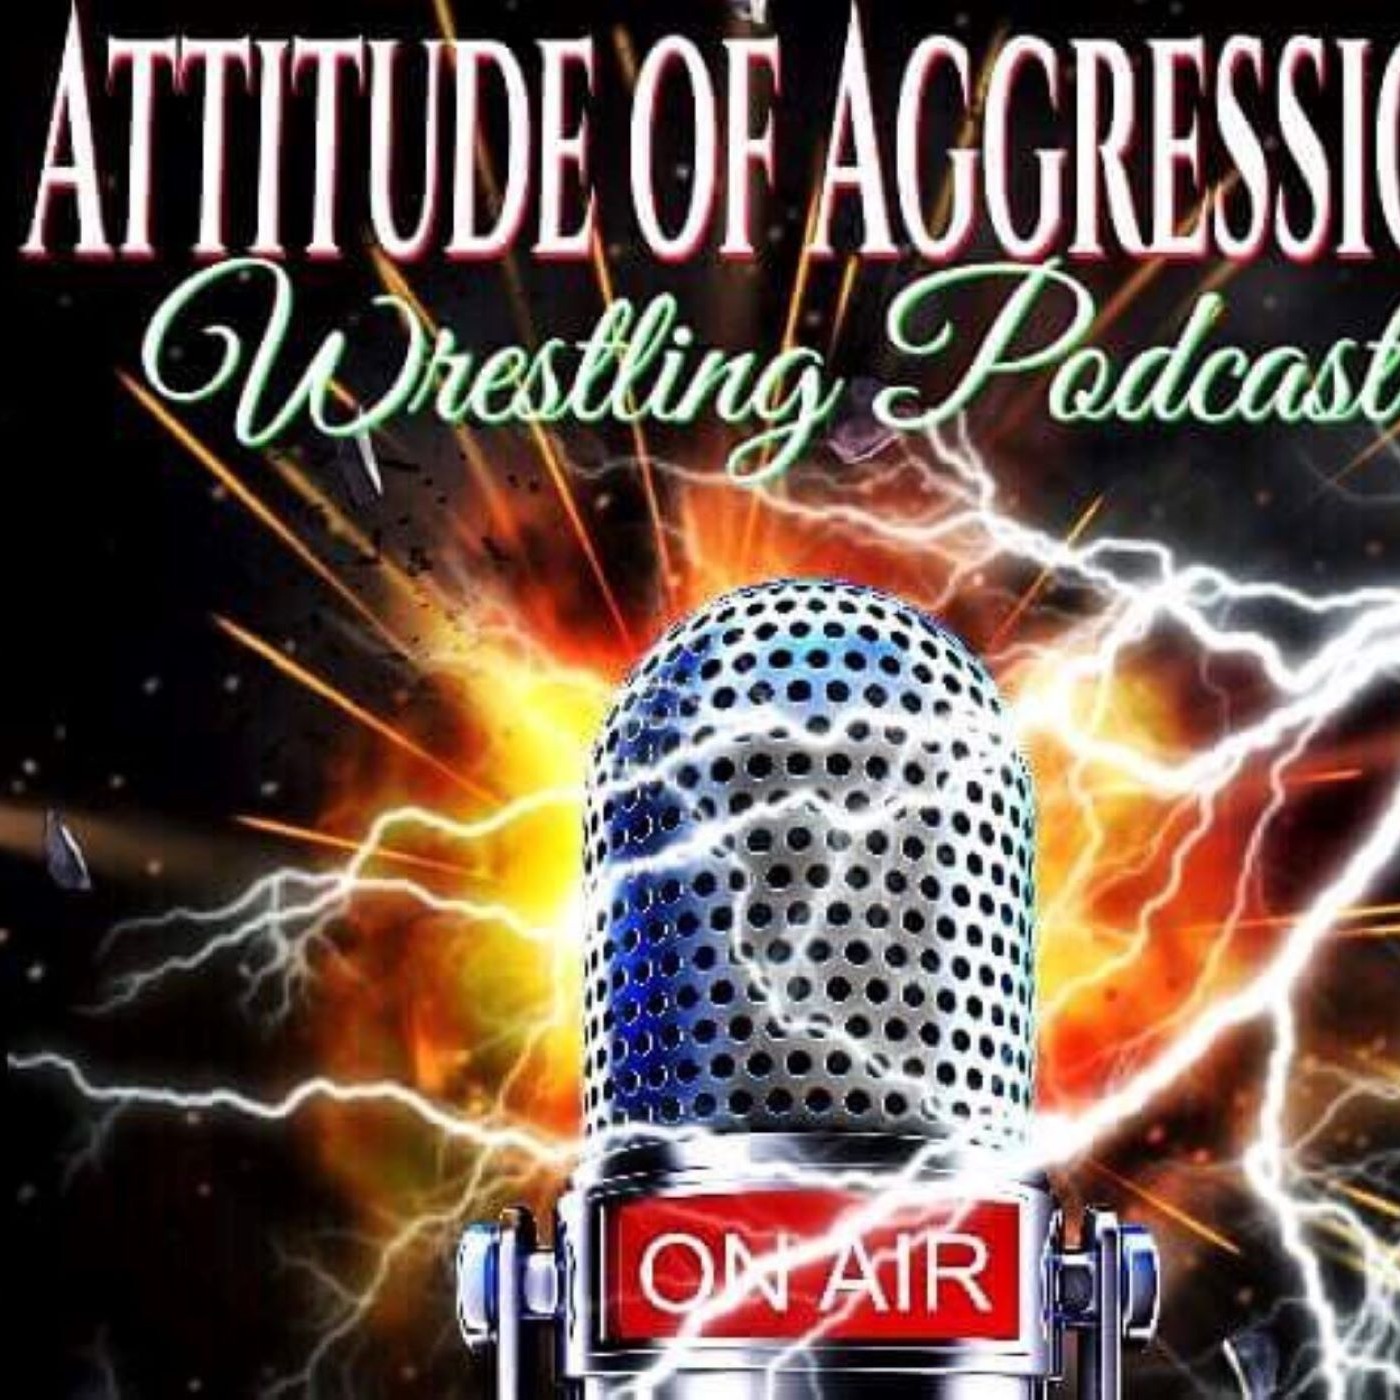 Attitude Of Aggression #281- The Big Four Project Chapter 8: Summer Slam ’90 & Survivor Series ’90